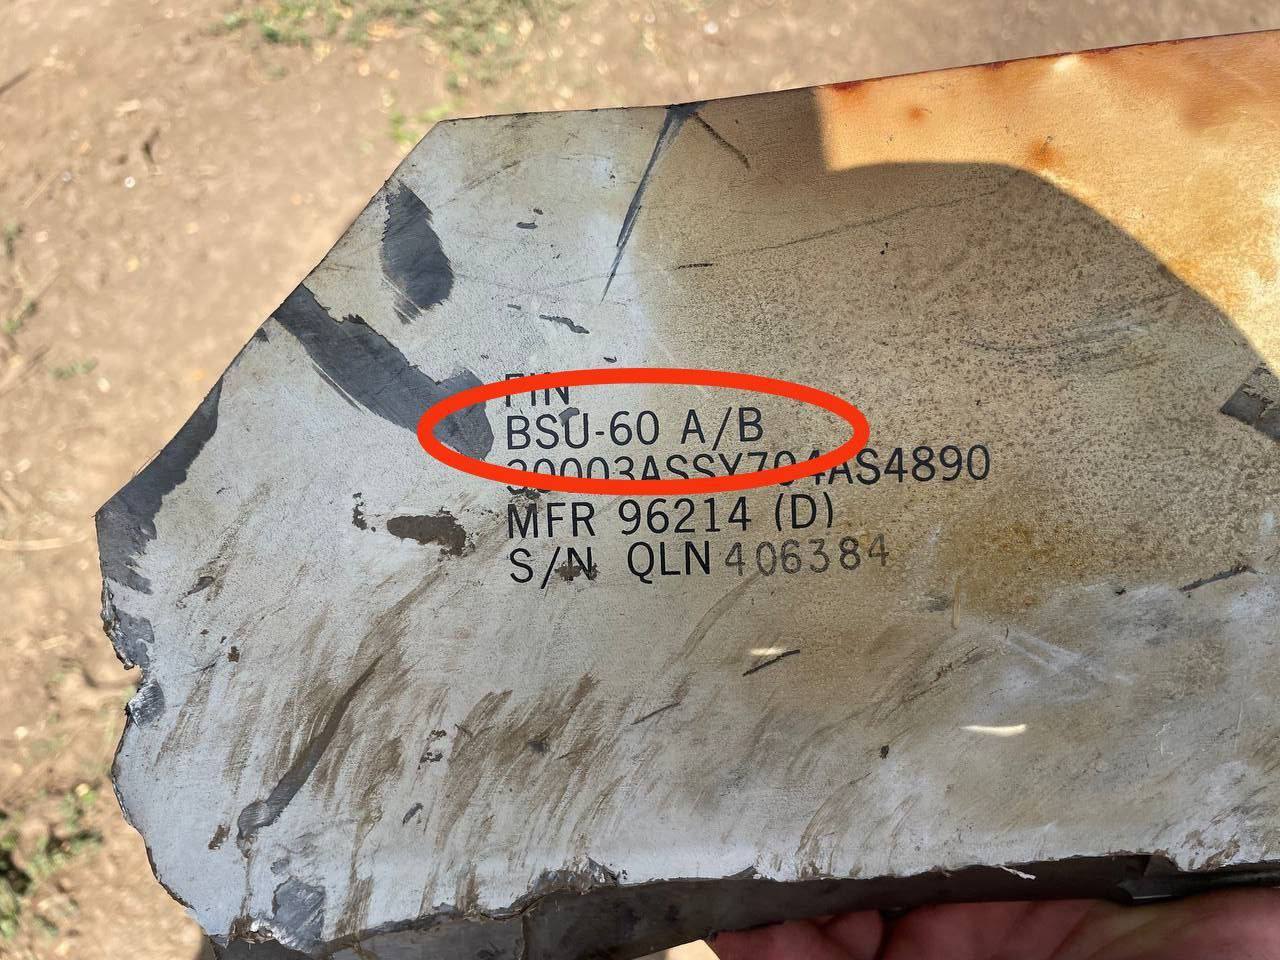 Fragments of the AGM-88 HARM missile at the position of the Russian military have been made public. August 2022. Ukraine. Photo from social media